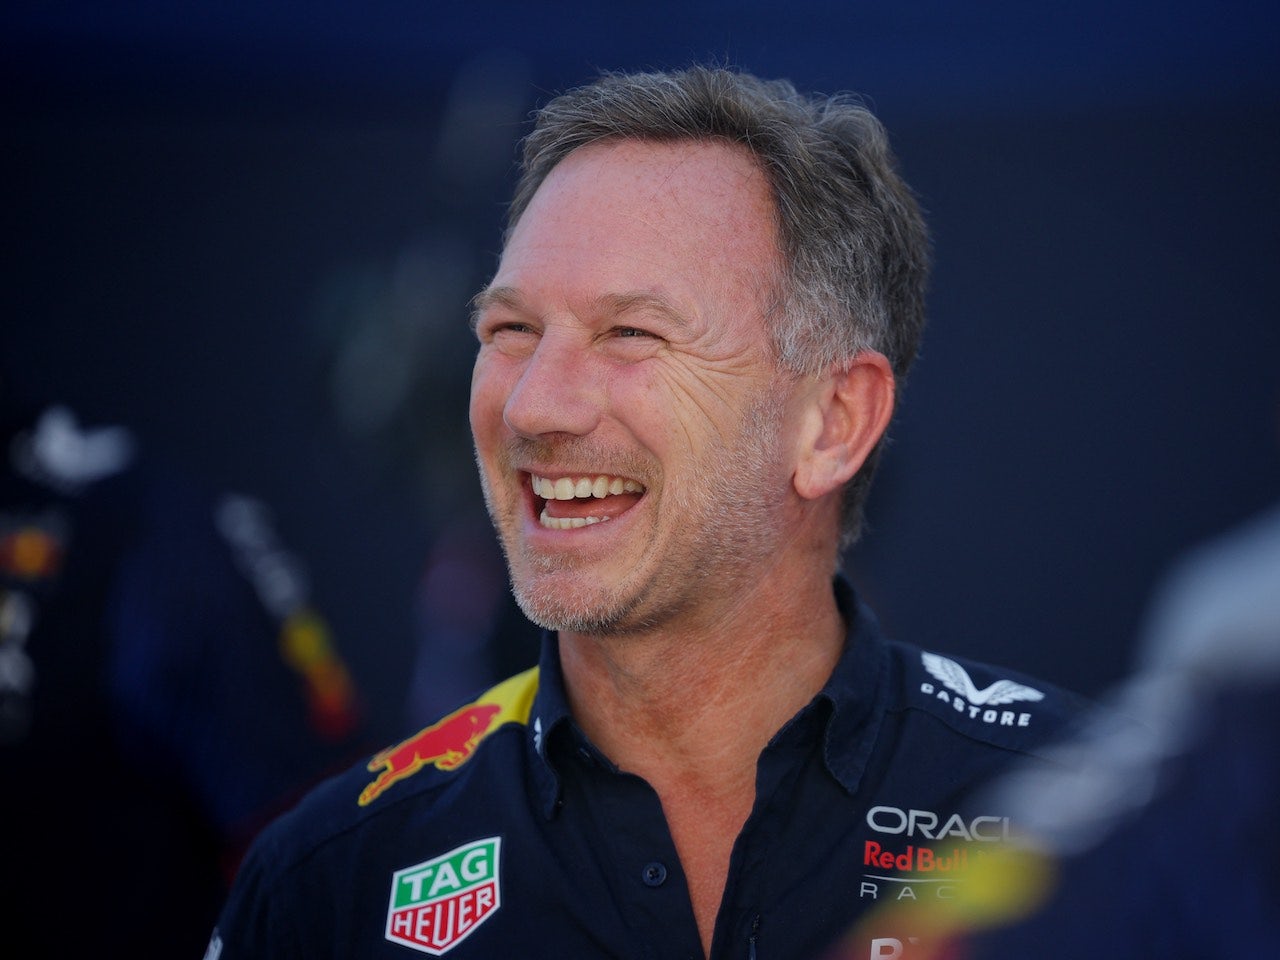 F1 insiders doubt Horner will survive Red Bull scandal